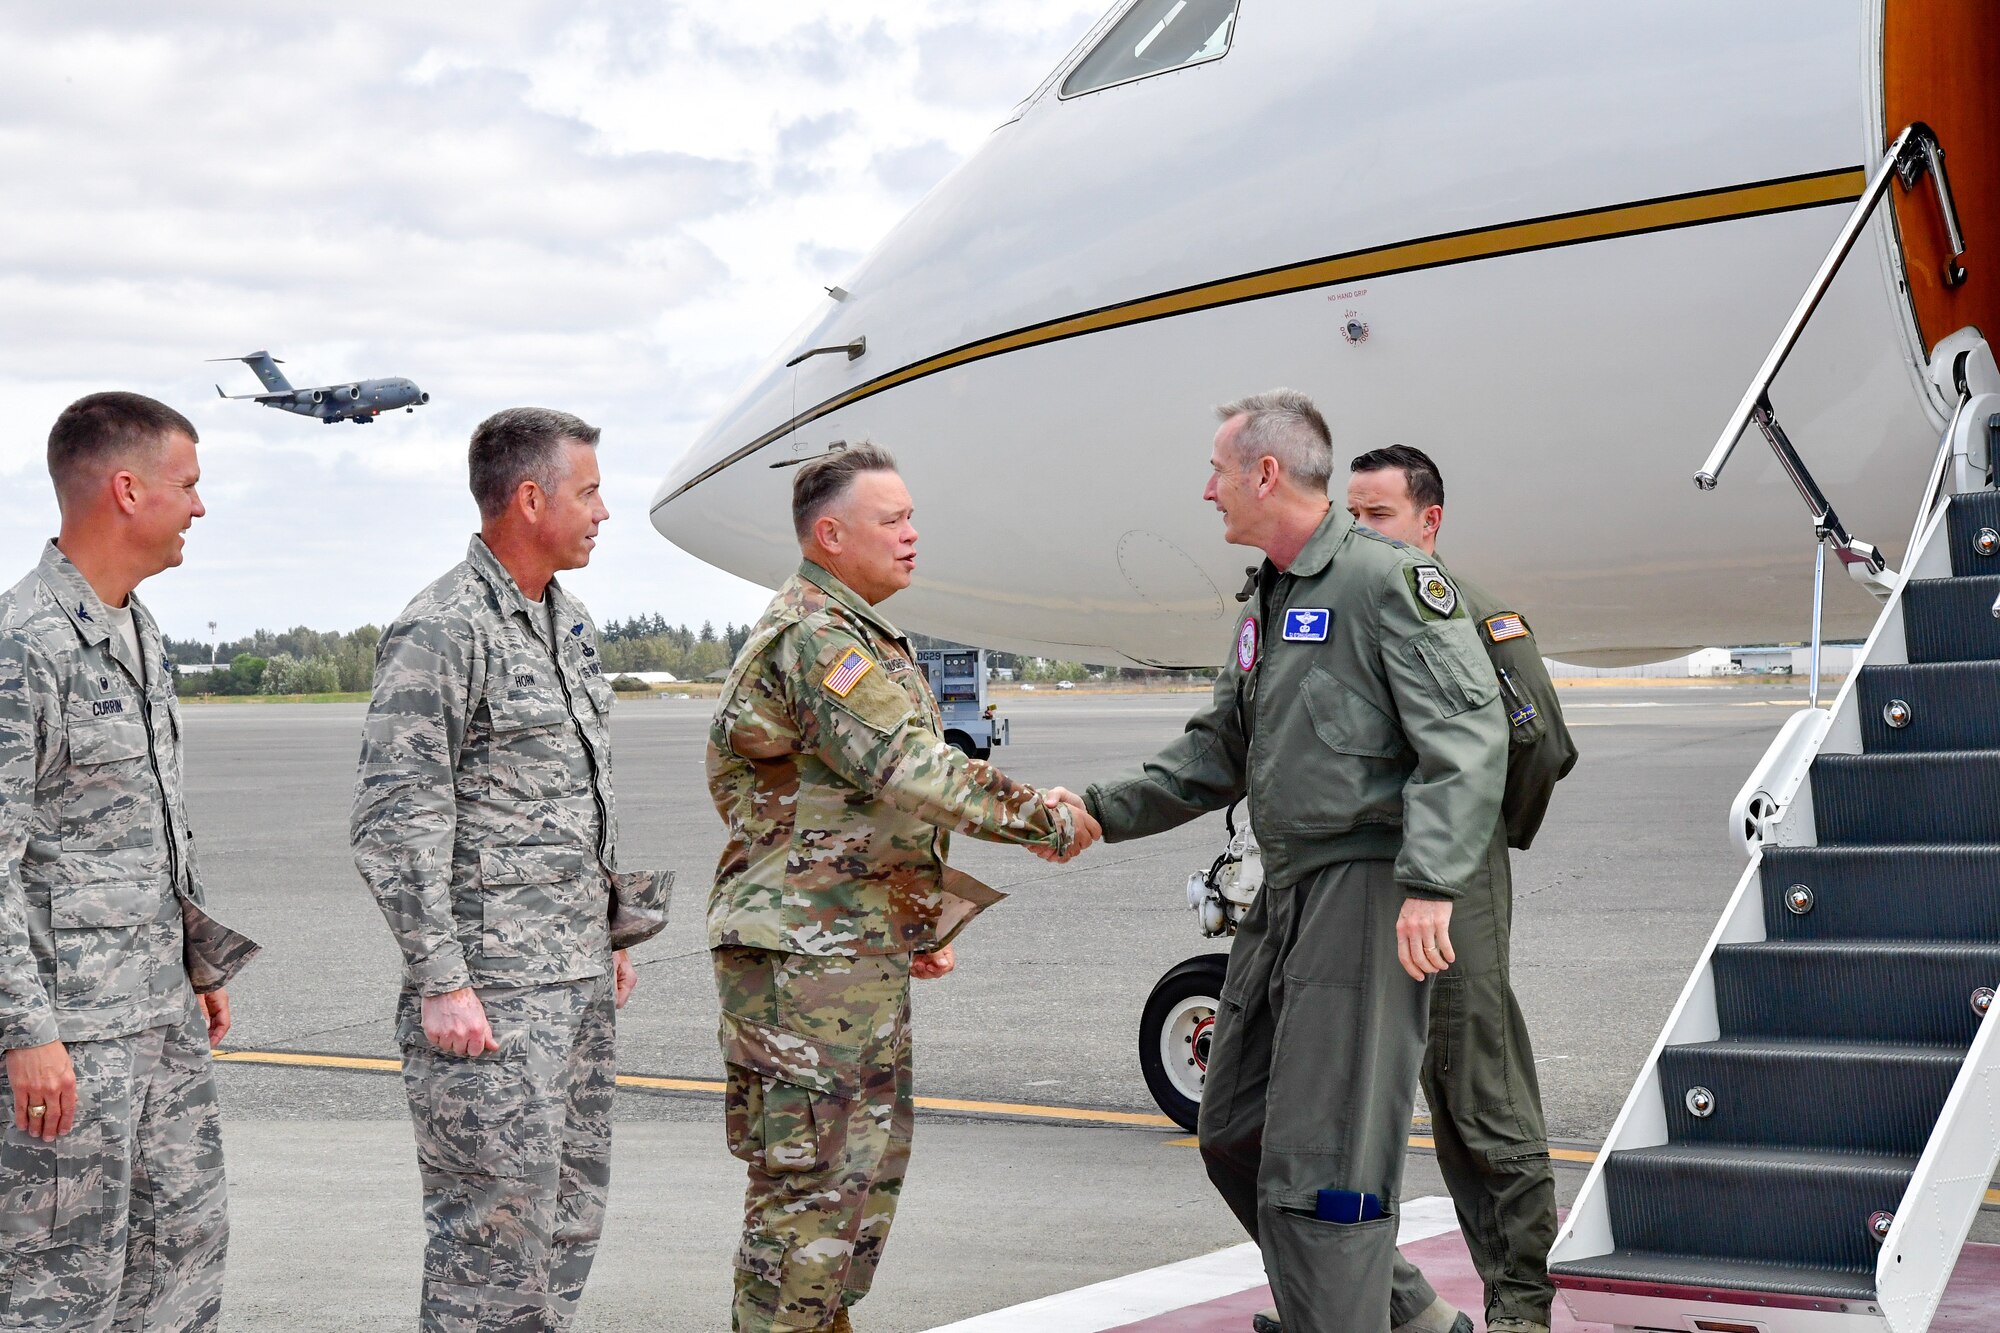 Maj. Gen. Bret Daughterty, The Adjutant General for Washington, greets Gen. Terrence O'Shaughnessy, NORAD and USNORTHCOM commander, as he arrives to Joint Base Lewis-McChord, Washington Aug. 23, 2018.  O'Shaughnessy met with the Western Air Defense Sector operations crew that provided command and control of the 142nd Fighter Wing's F-15 intercept of the Aug. 10 stolen Horizon Bombardier Q400 aircraft out of SeaTac International Airport.  Also pictured are Brig. Gen. Jeremy Horn, Washington Air National Guard Commander (second from left) and Col. Scovill Currin, 62nd Airlift Wing Commander (left).  (U.S. Air National Guard photo by Maj. Kimberly D. Burke)